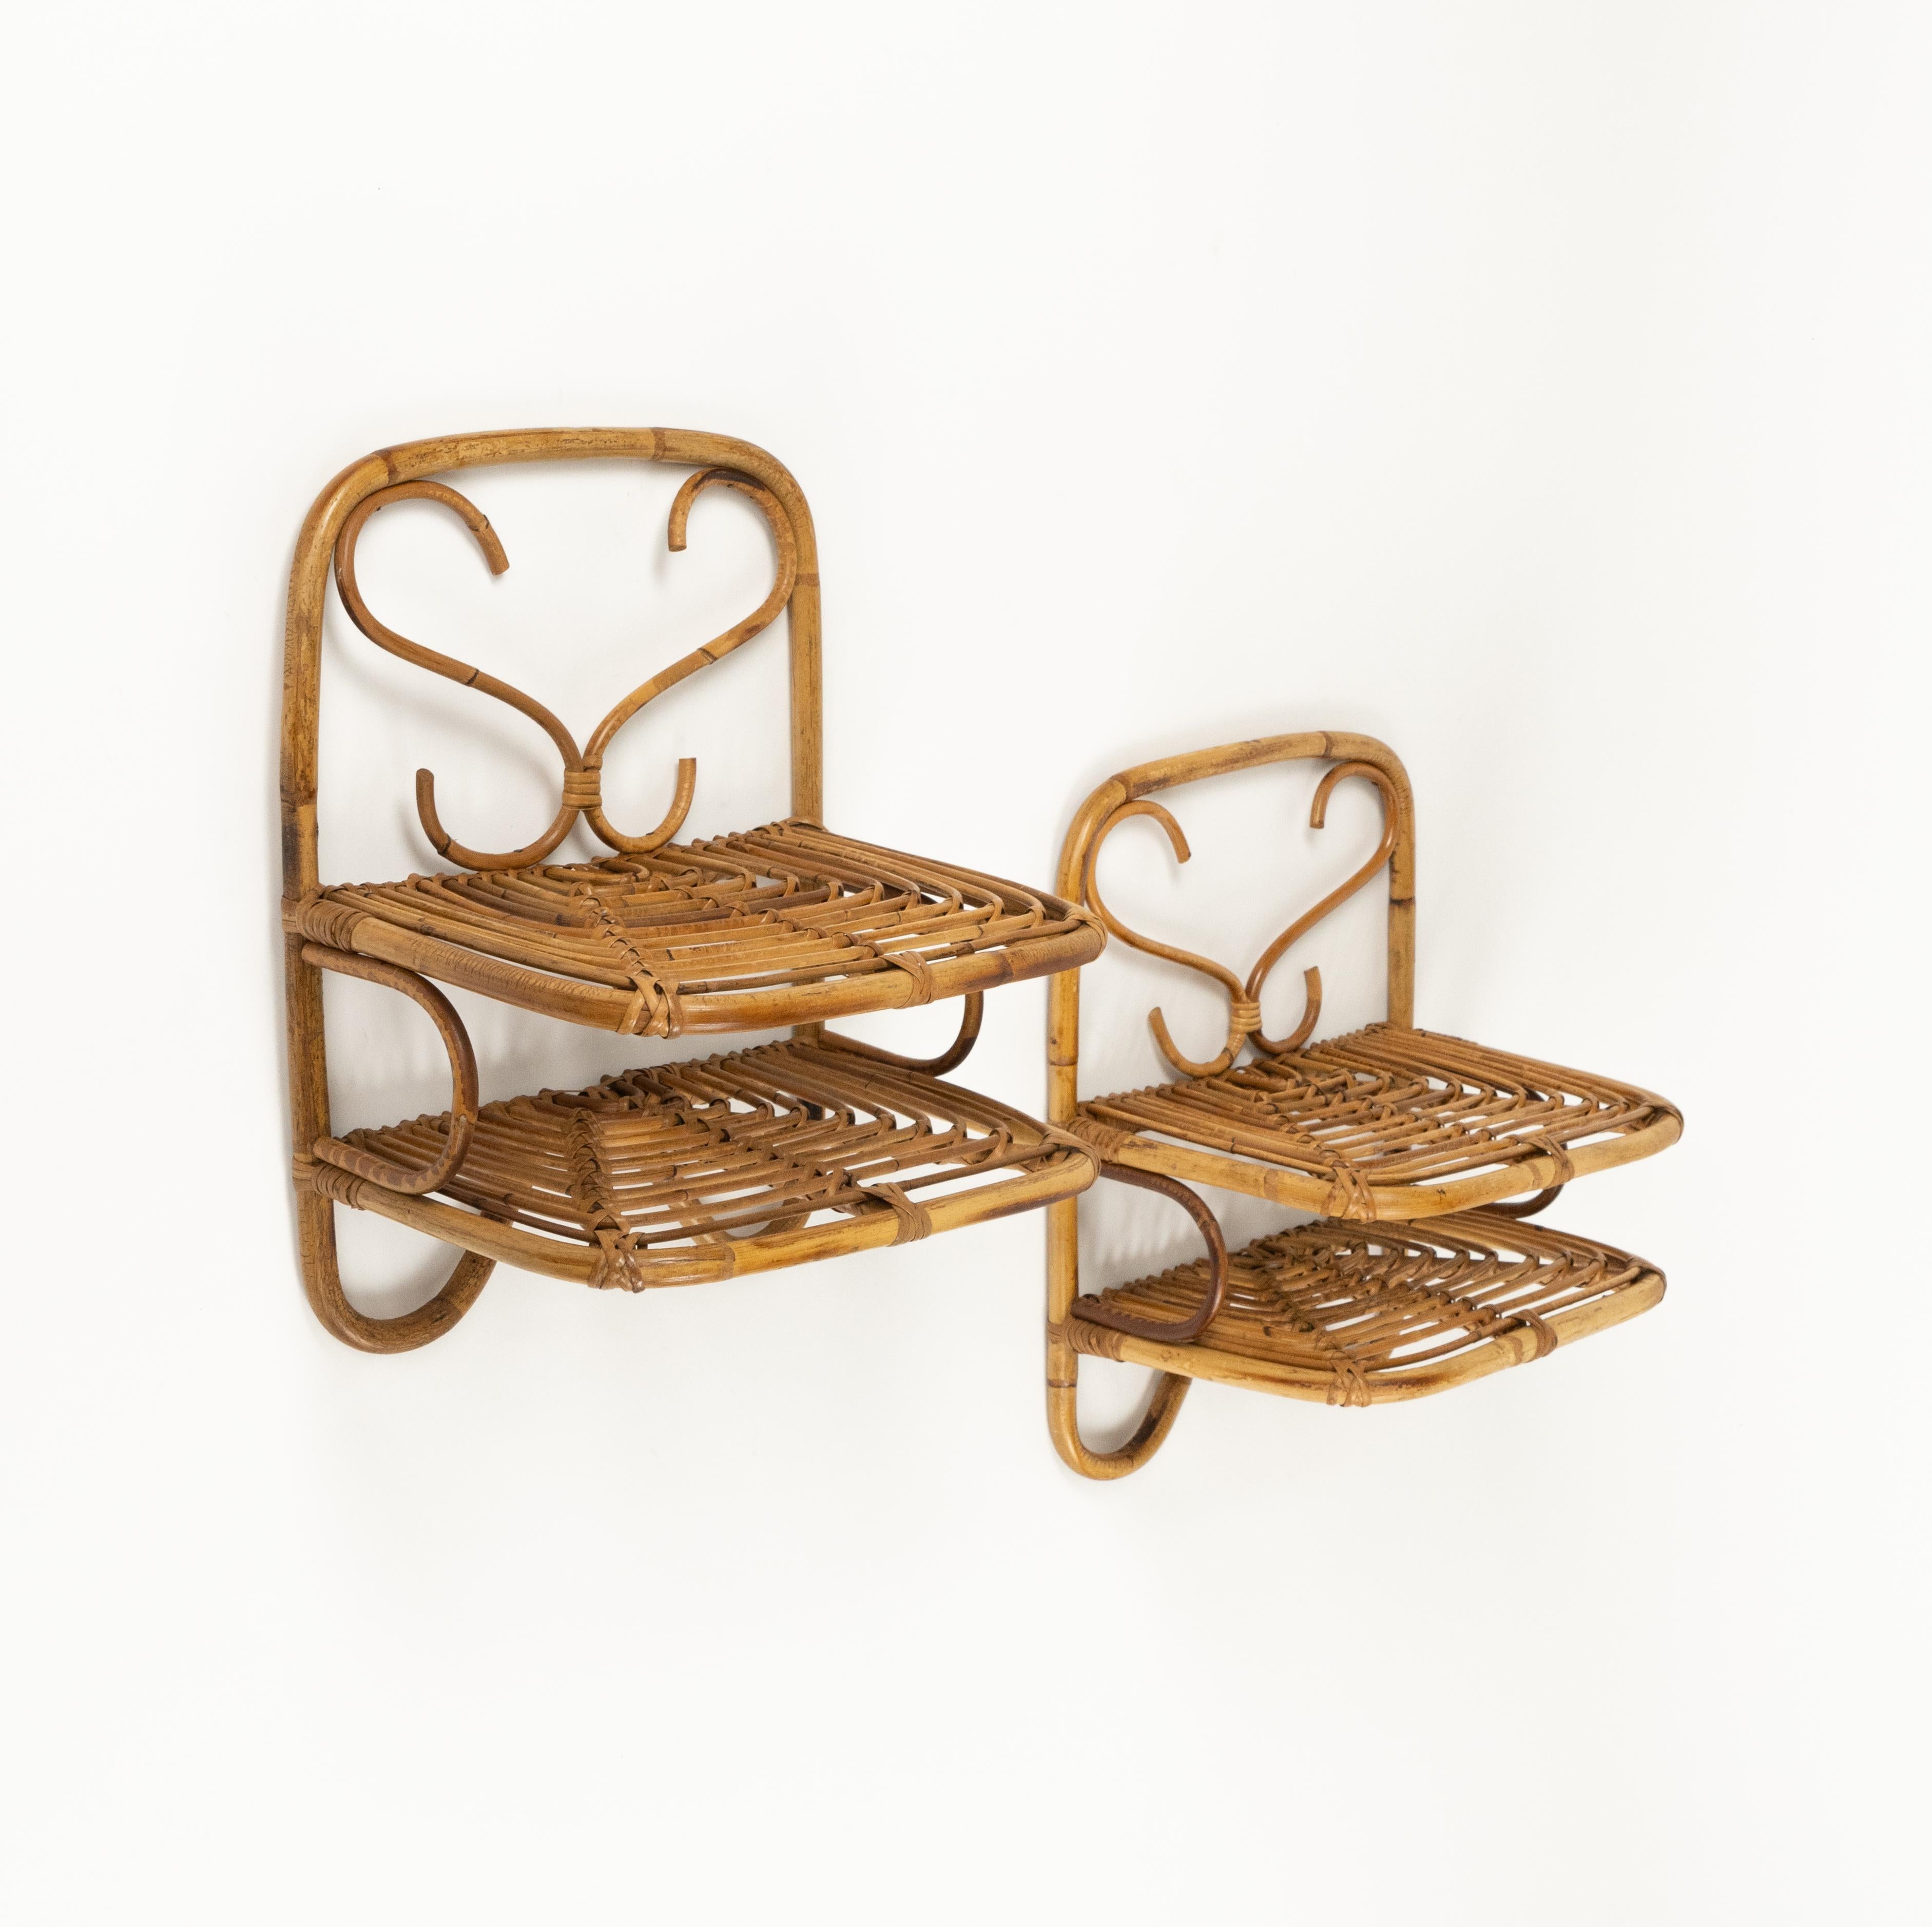 Midcentury amazing pair of shelf or hanging side table with two tier in bamboo and rattan in the style of Franco Albini.

Made in Italy in the 1960s.